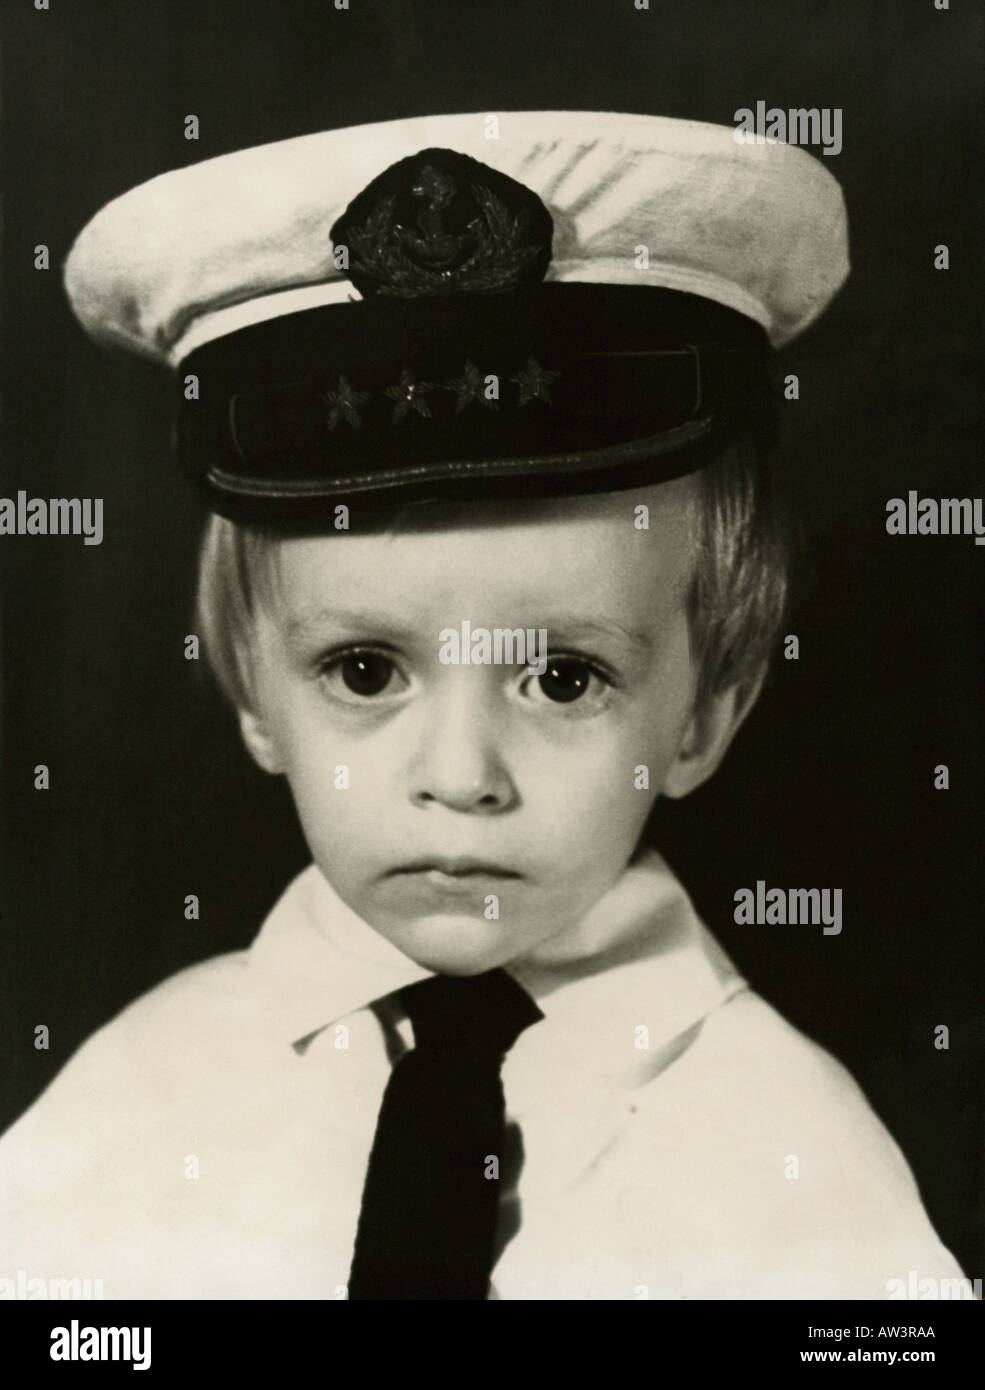 Little boy wearing captain outfit, Poland Stock Photo